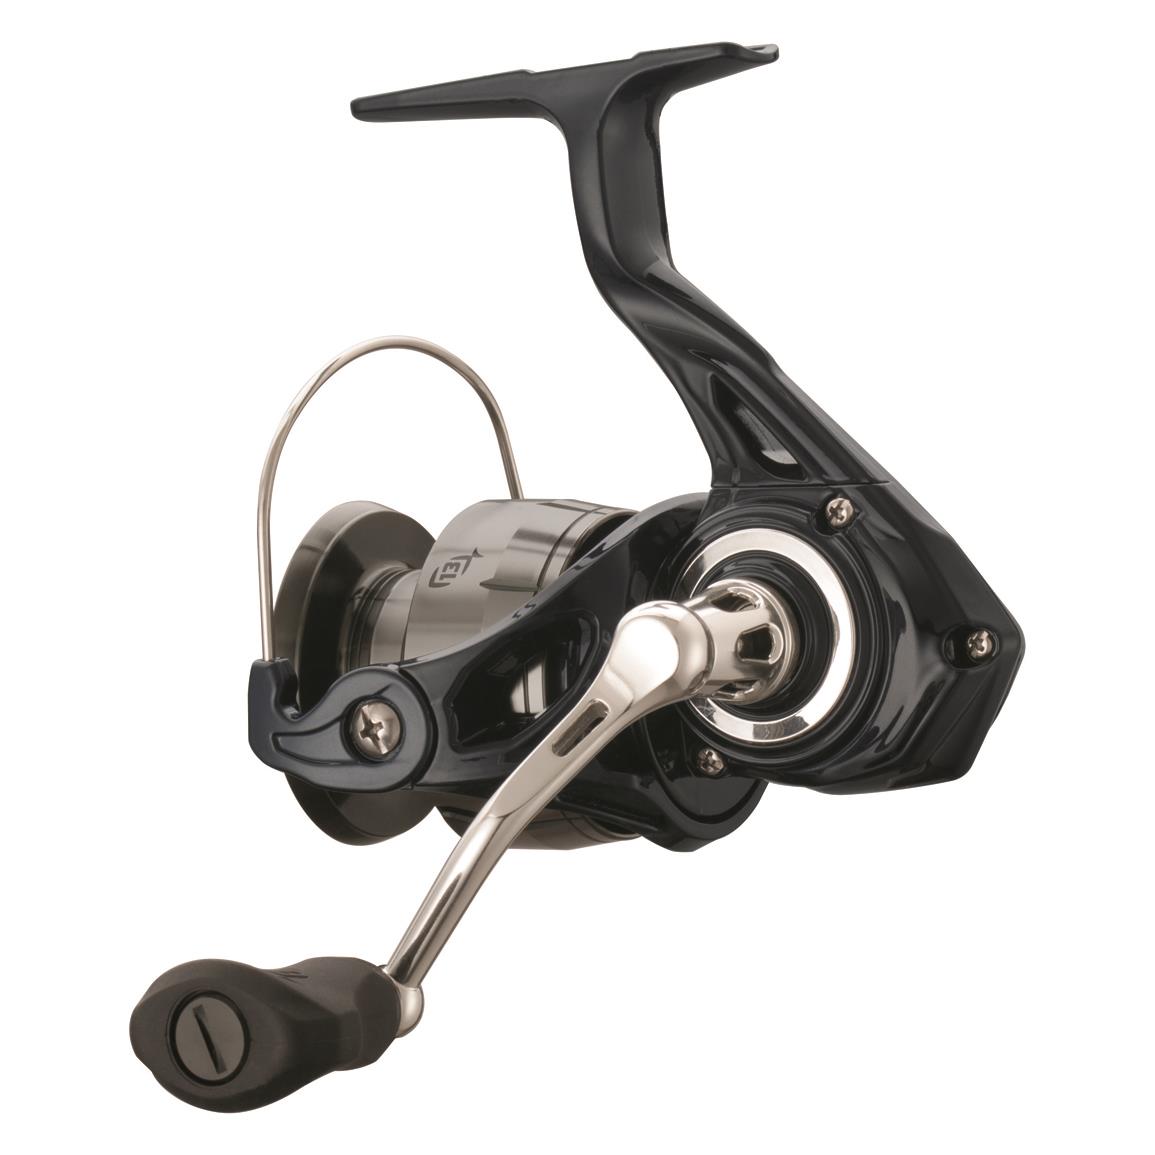 Mr. Crappie Wally Marshall Speed Shooter Spinning Reels - 732906